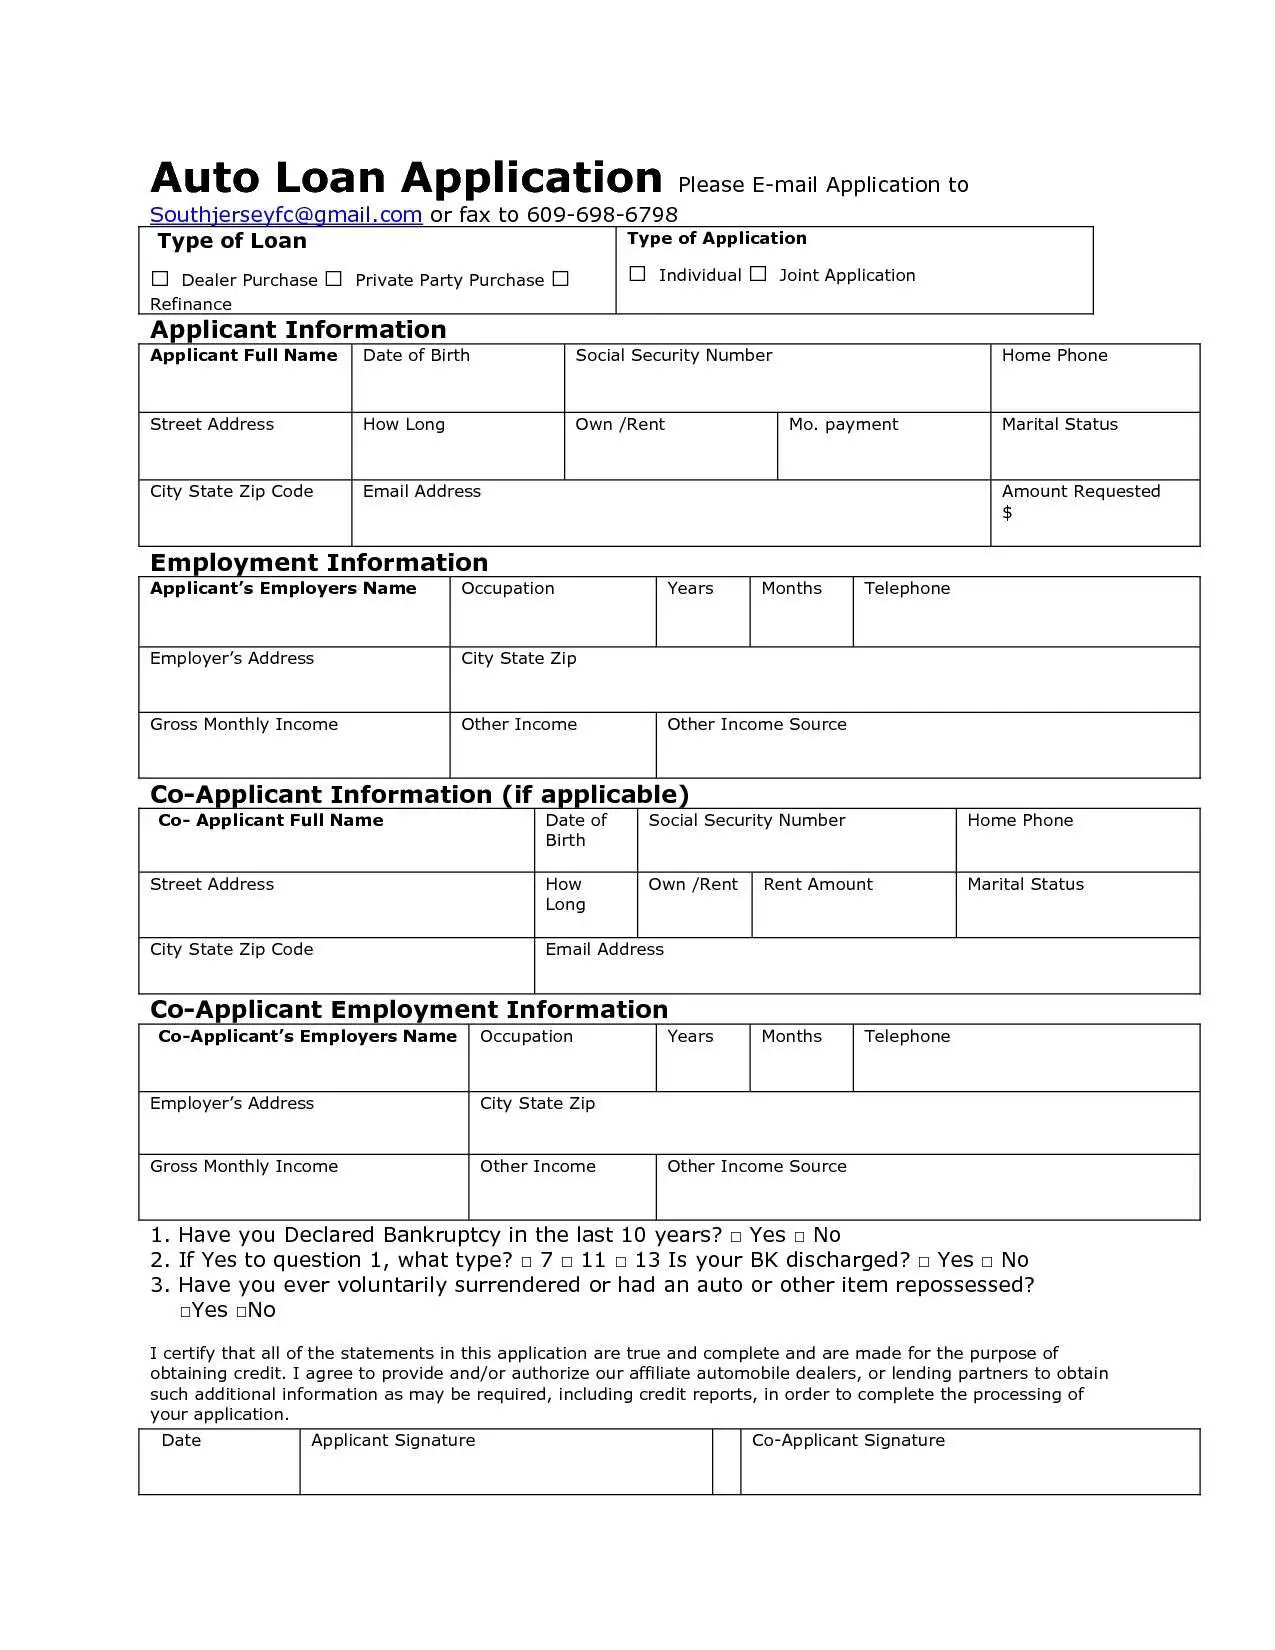 Image result for auto loan application form